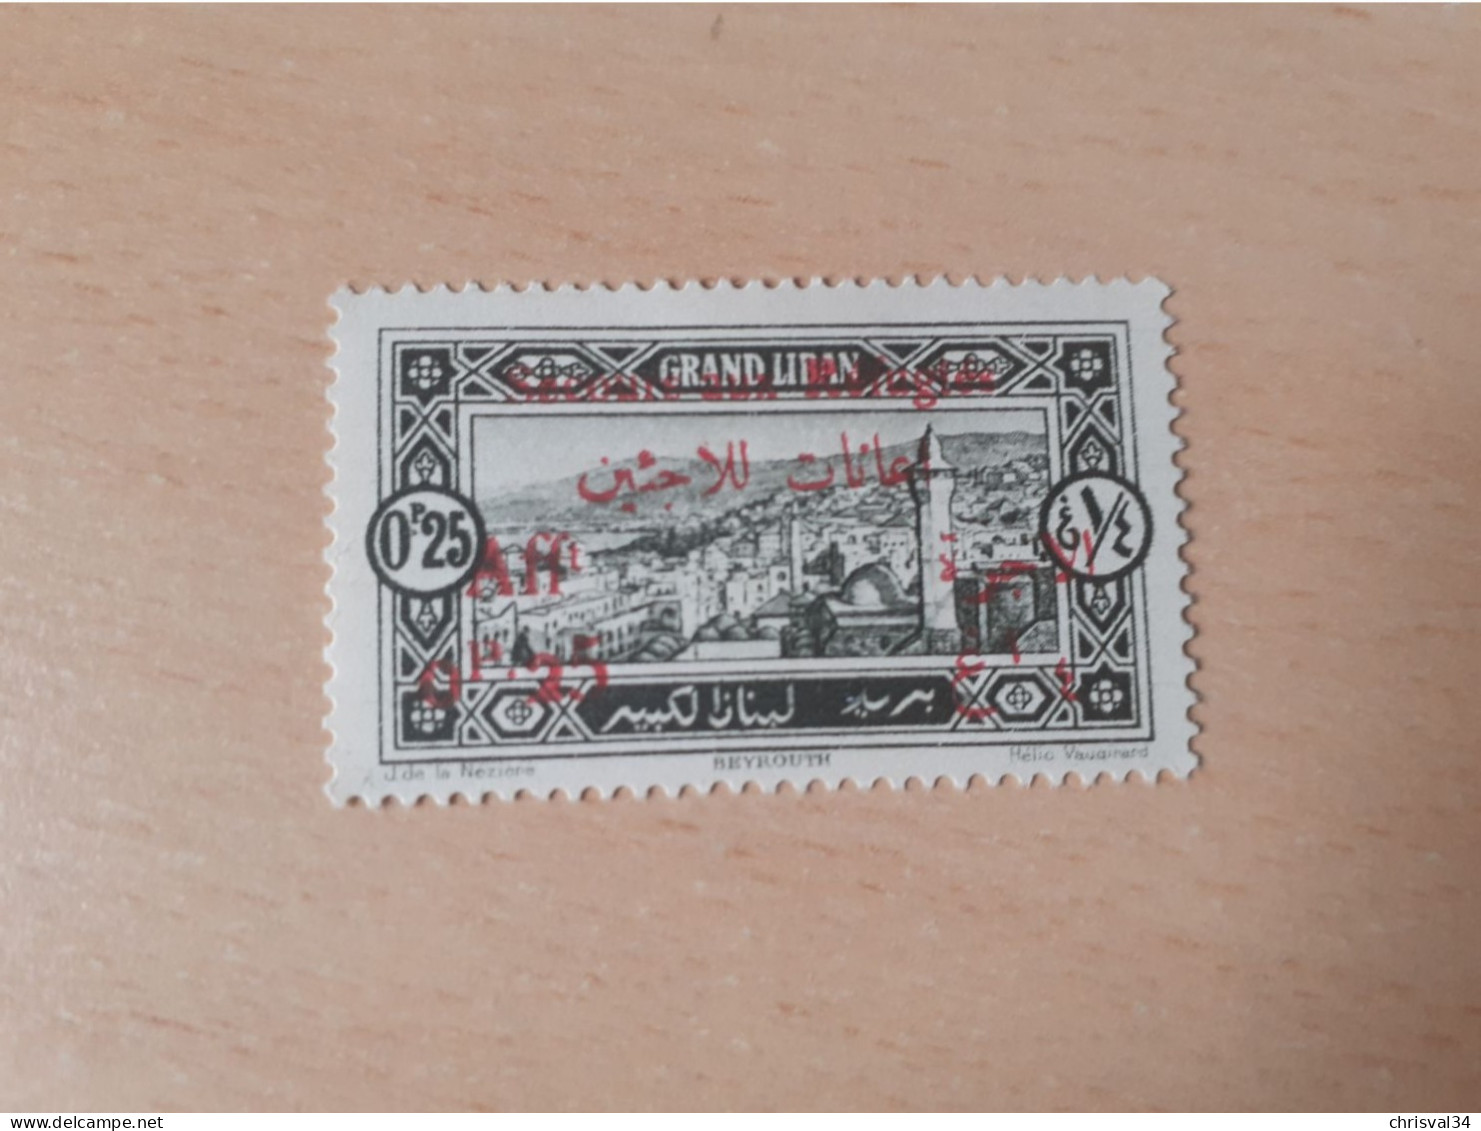 TIMBRE   GRAND  LIBAN       N  63       COTE  3,50  EUROS    NEUF  TRACE  CHARNIERE - Unused Stamps